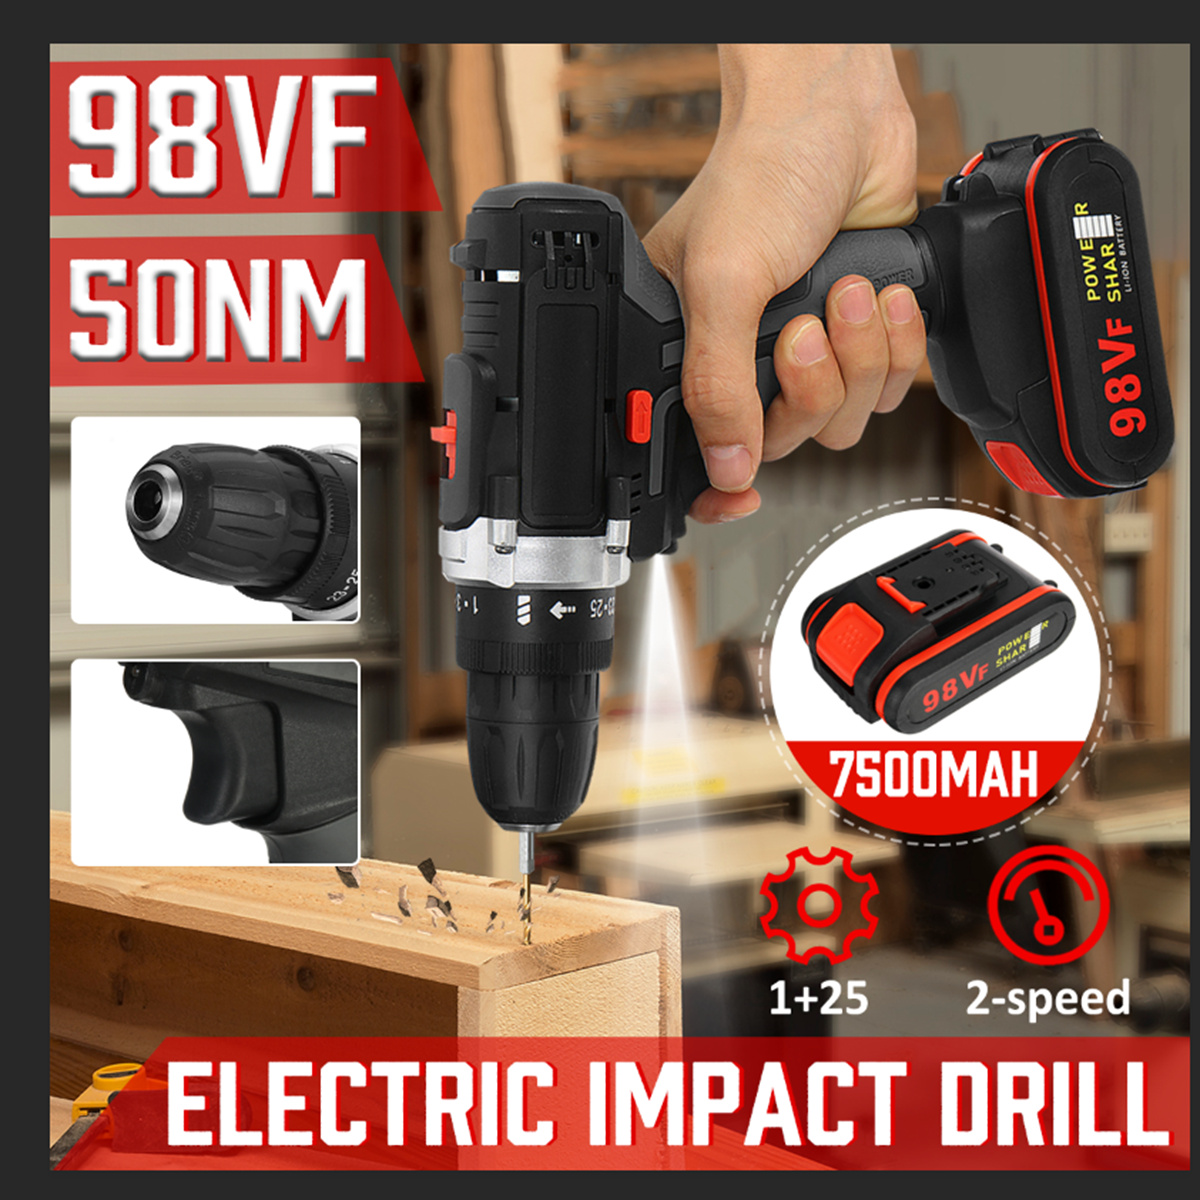 98VF-Rechargeable-Electric-Cordless-Impact-Drill-Screwdriver-251-Torque-LED-1569430-2